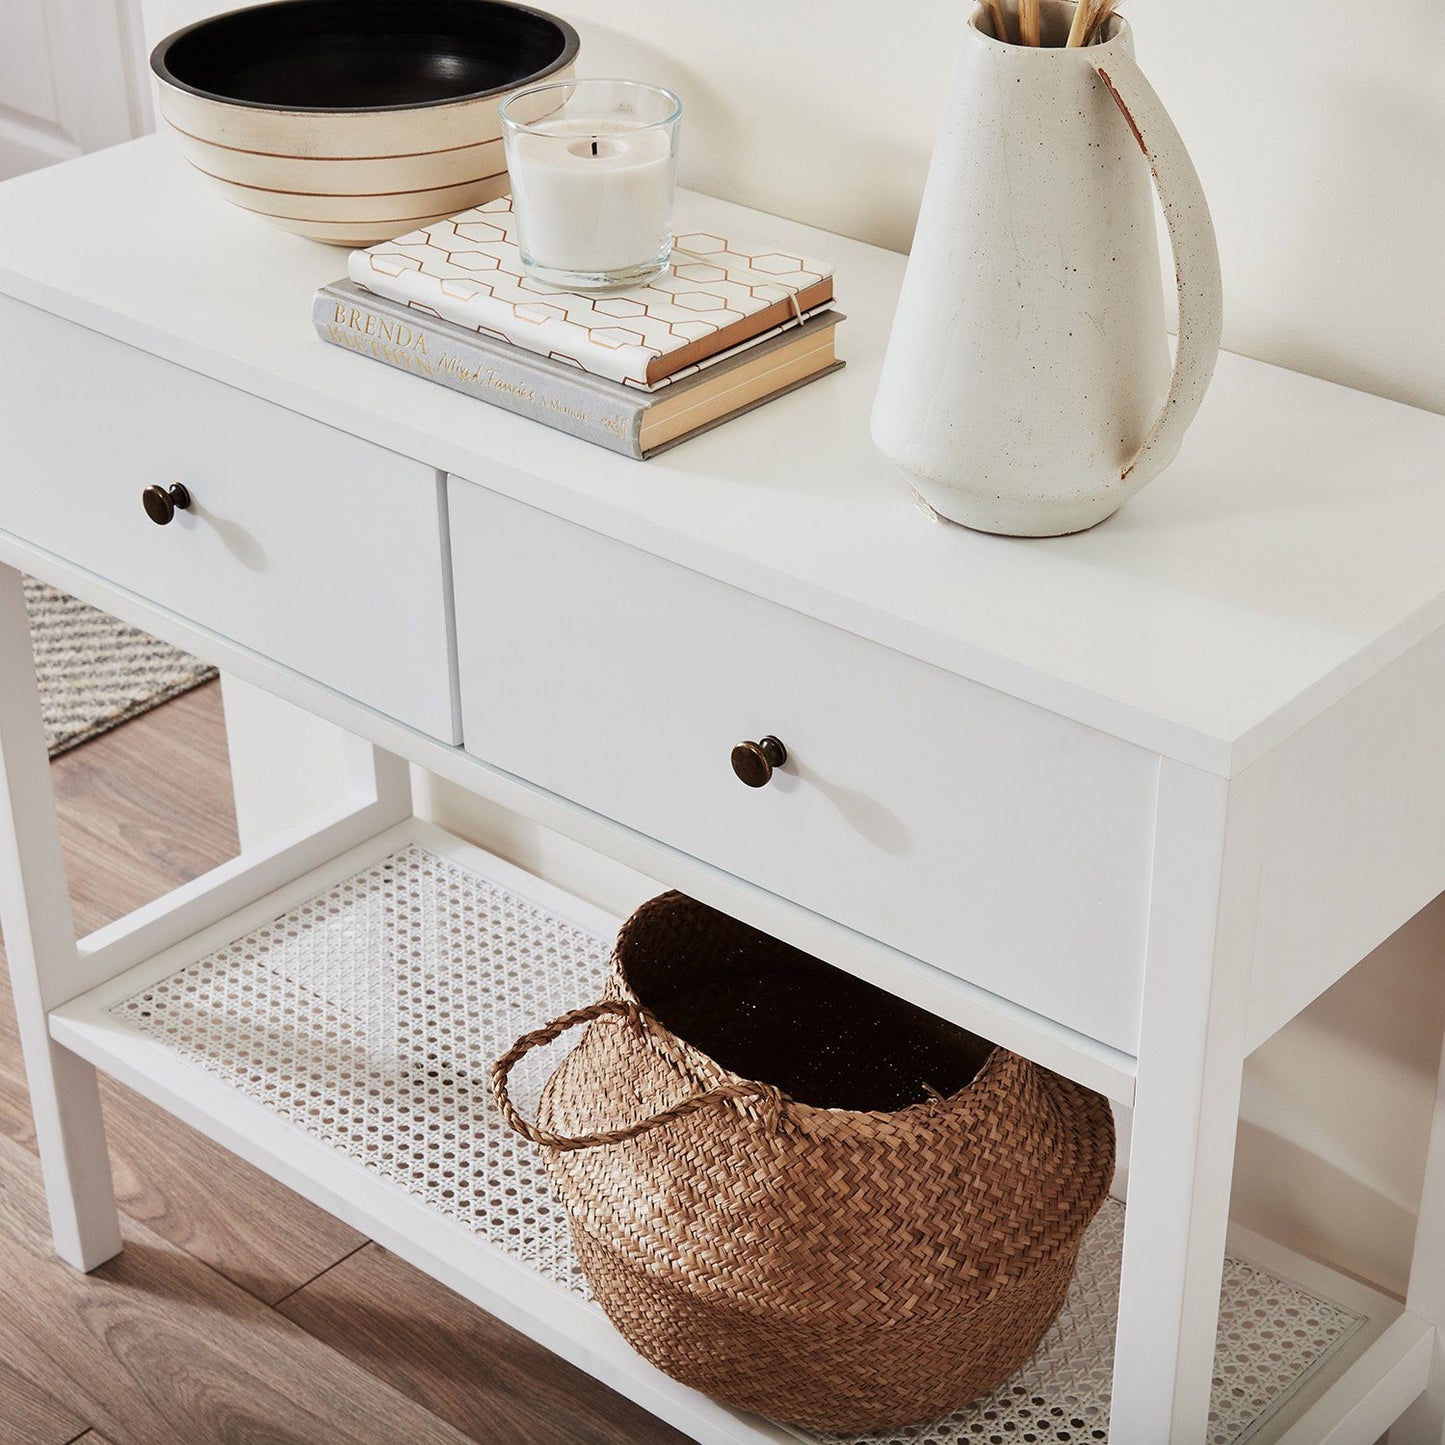 Charlie console table - white - Laura James